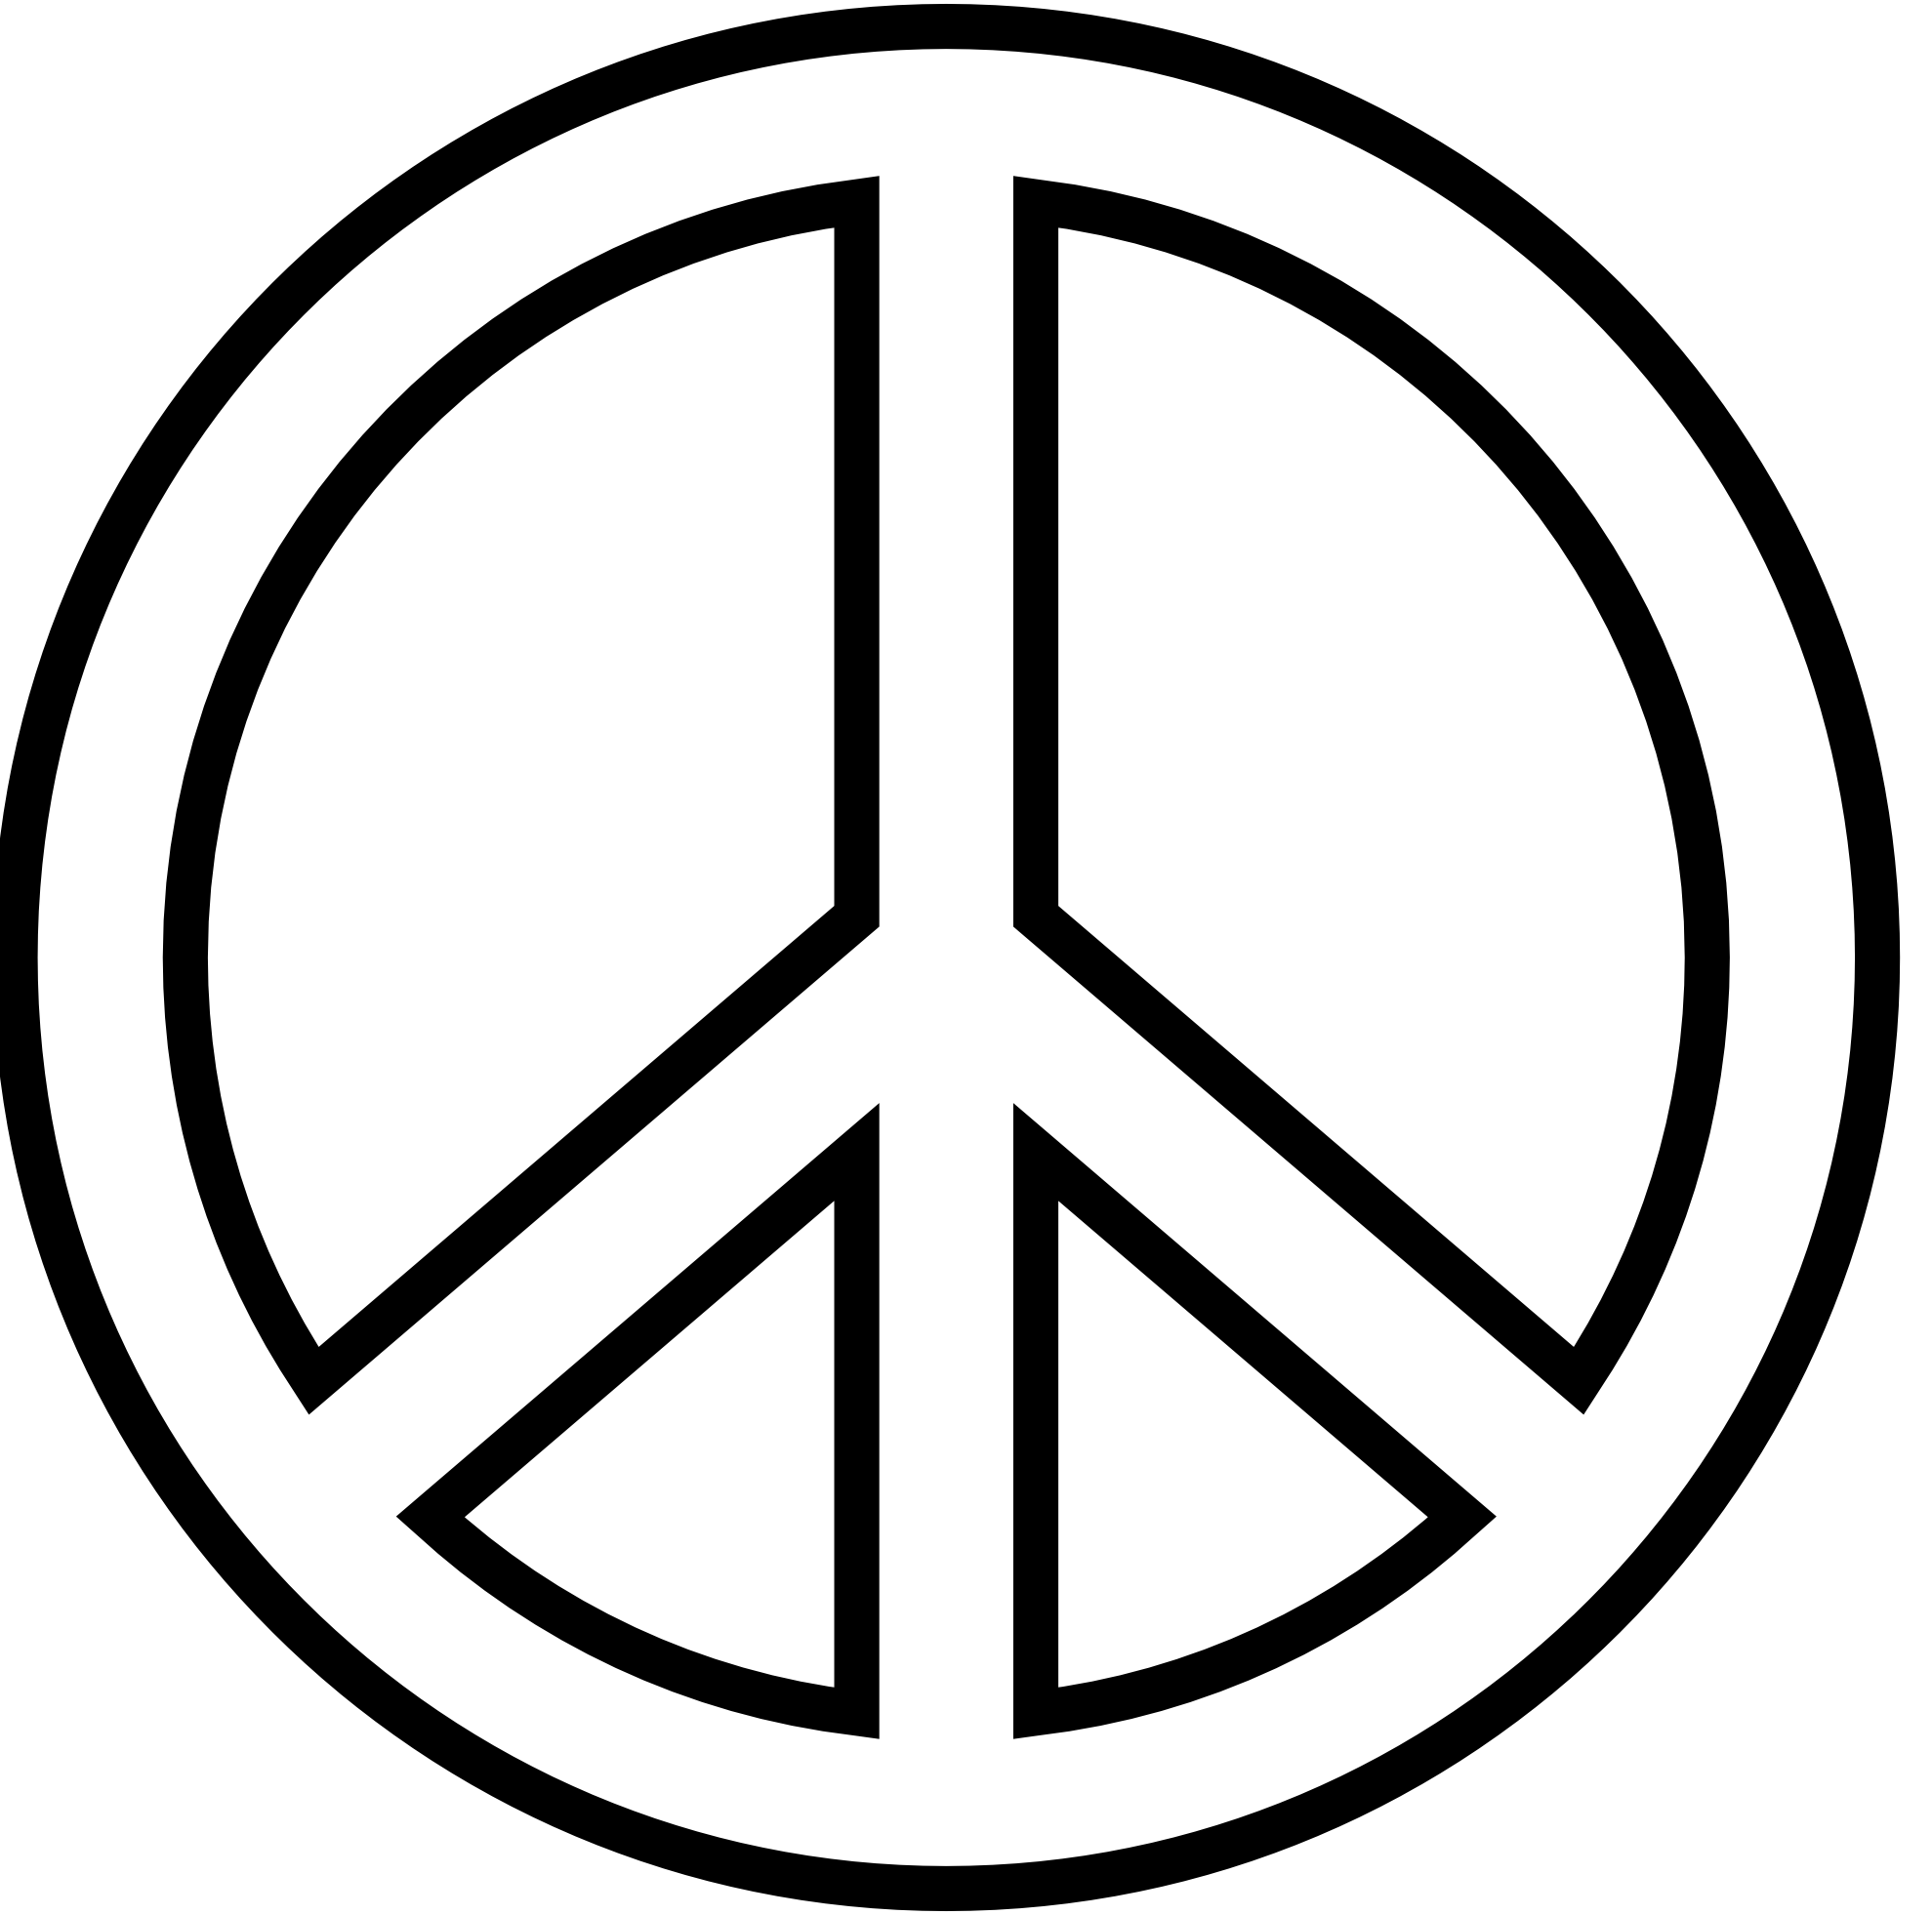 6 Best Images of Large Peace Sign Printable - Peace Sign Symbol ...